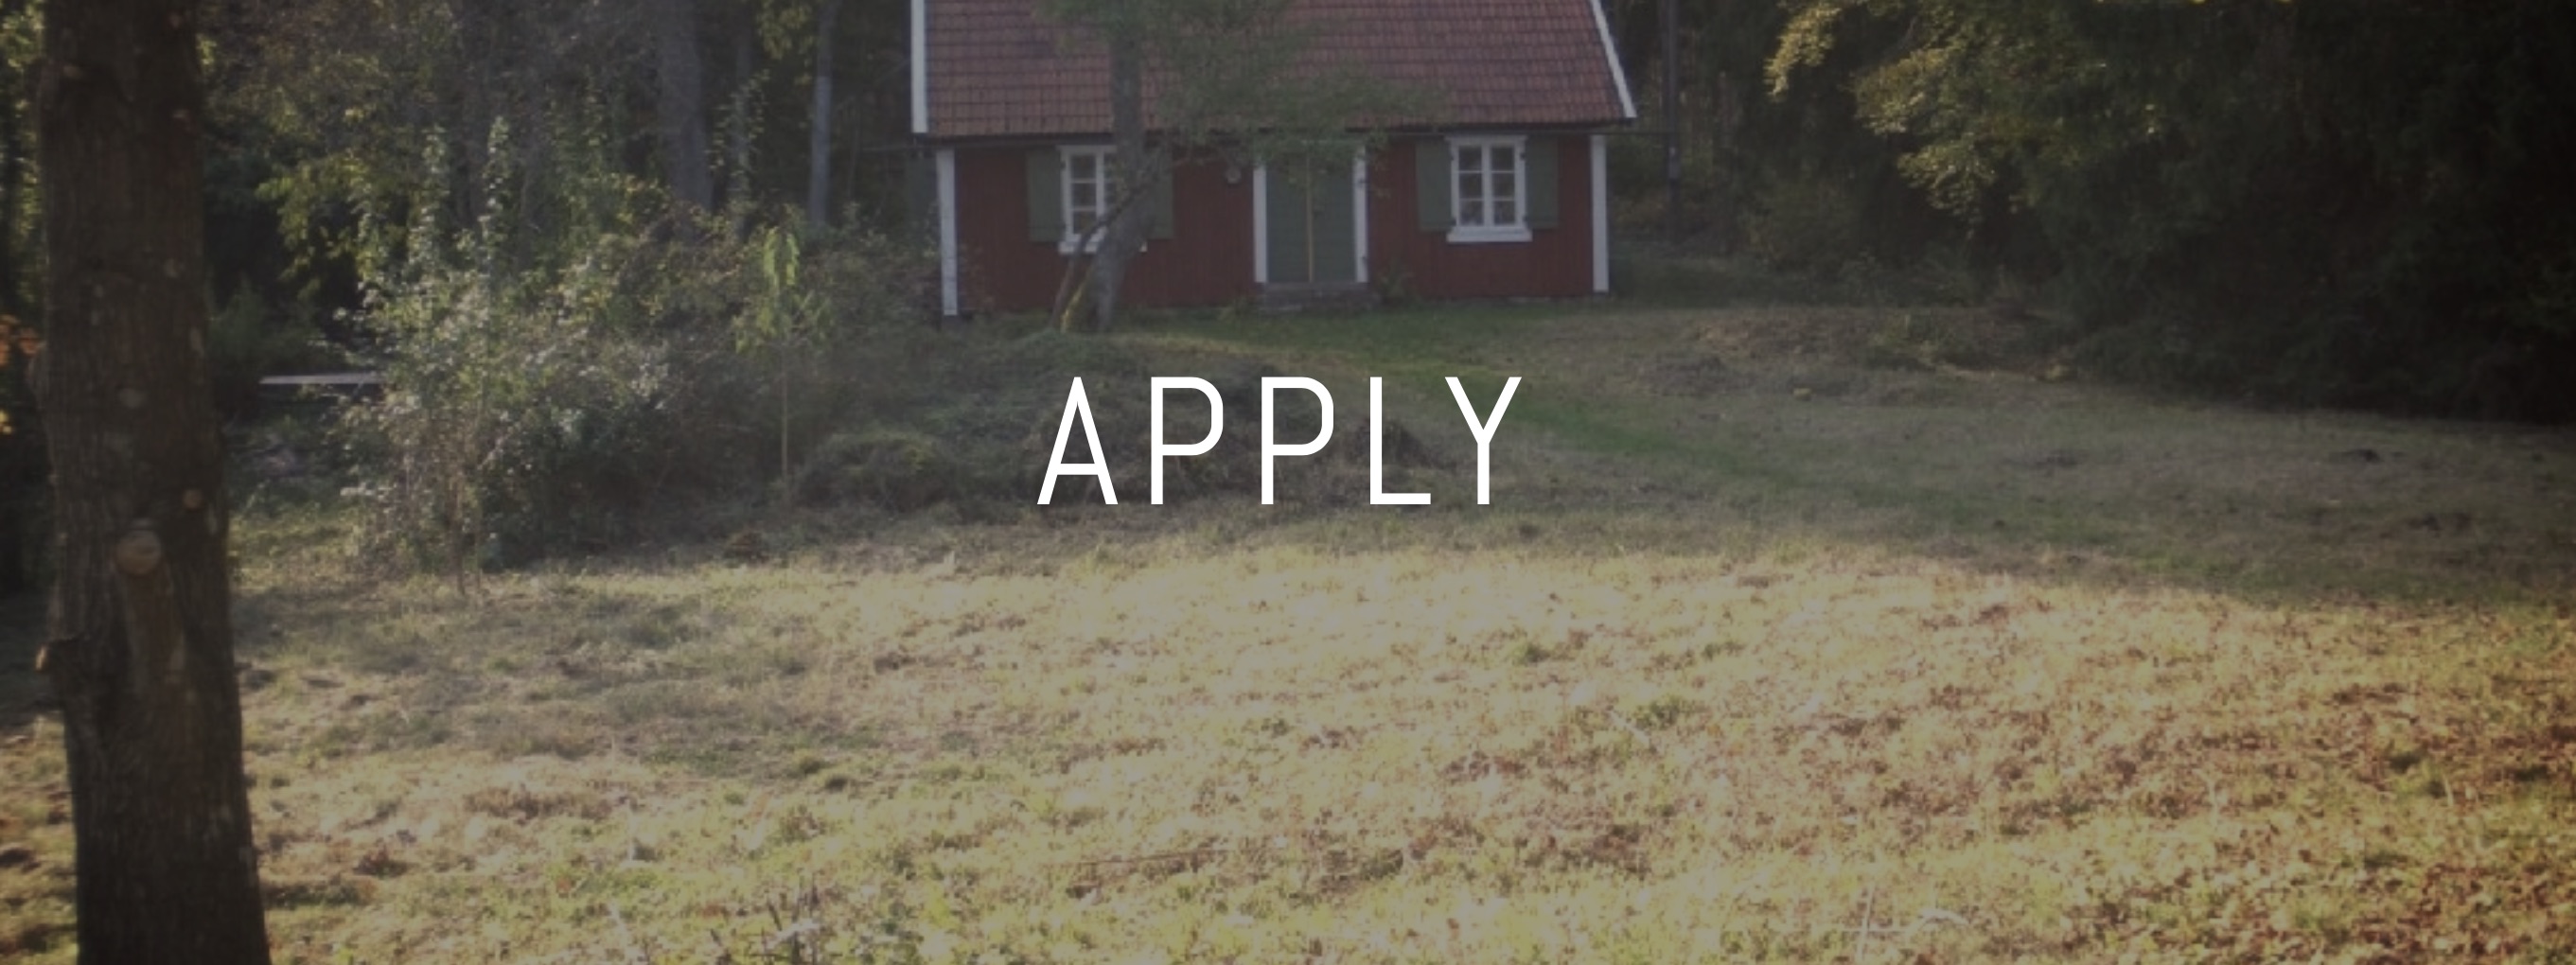 There's a Week Left to Apply for Stugan: Every Developer Needs to Sign Up